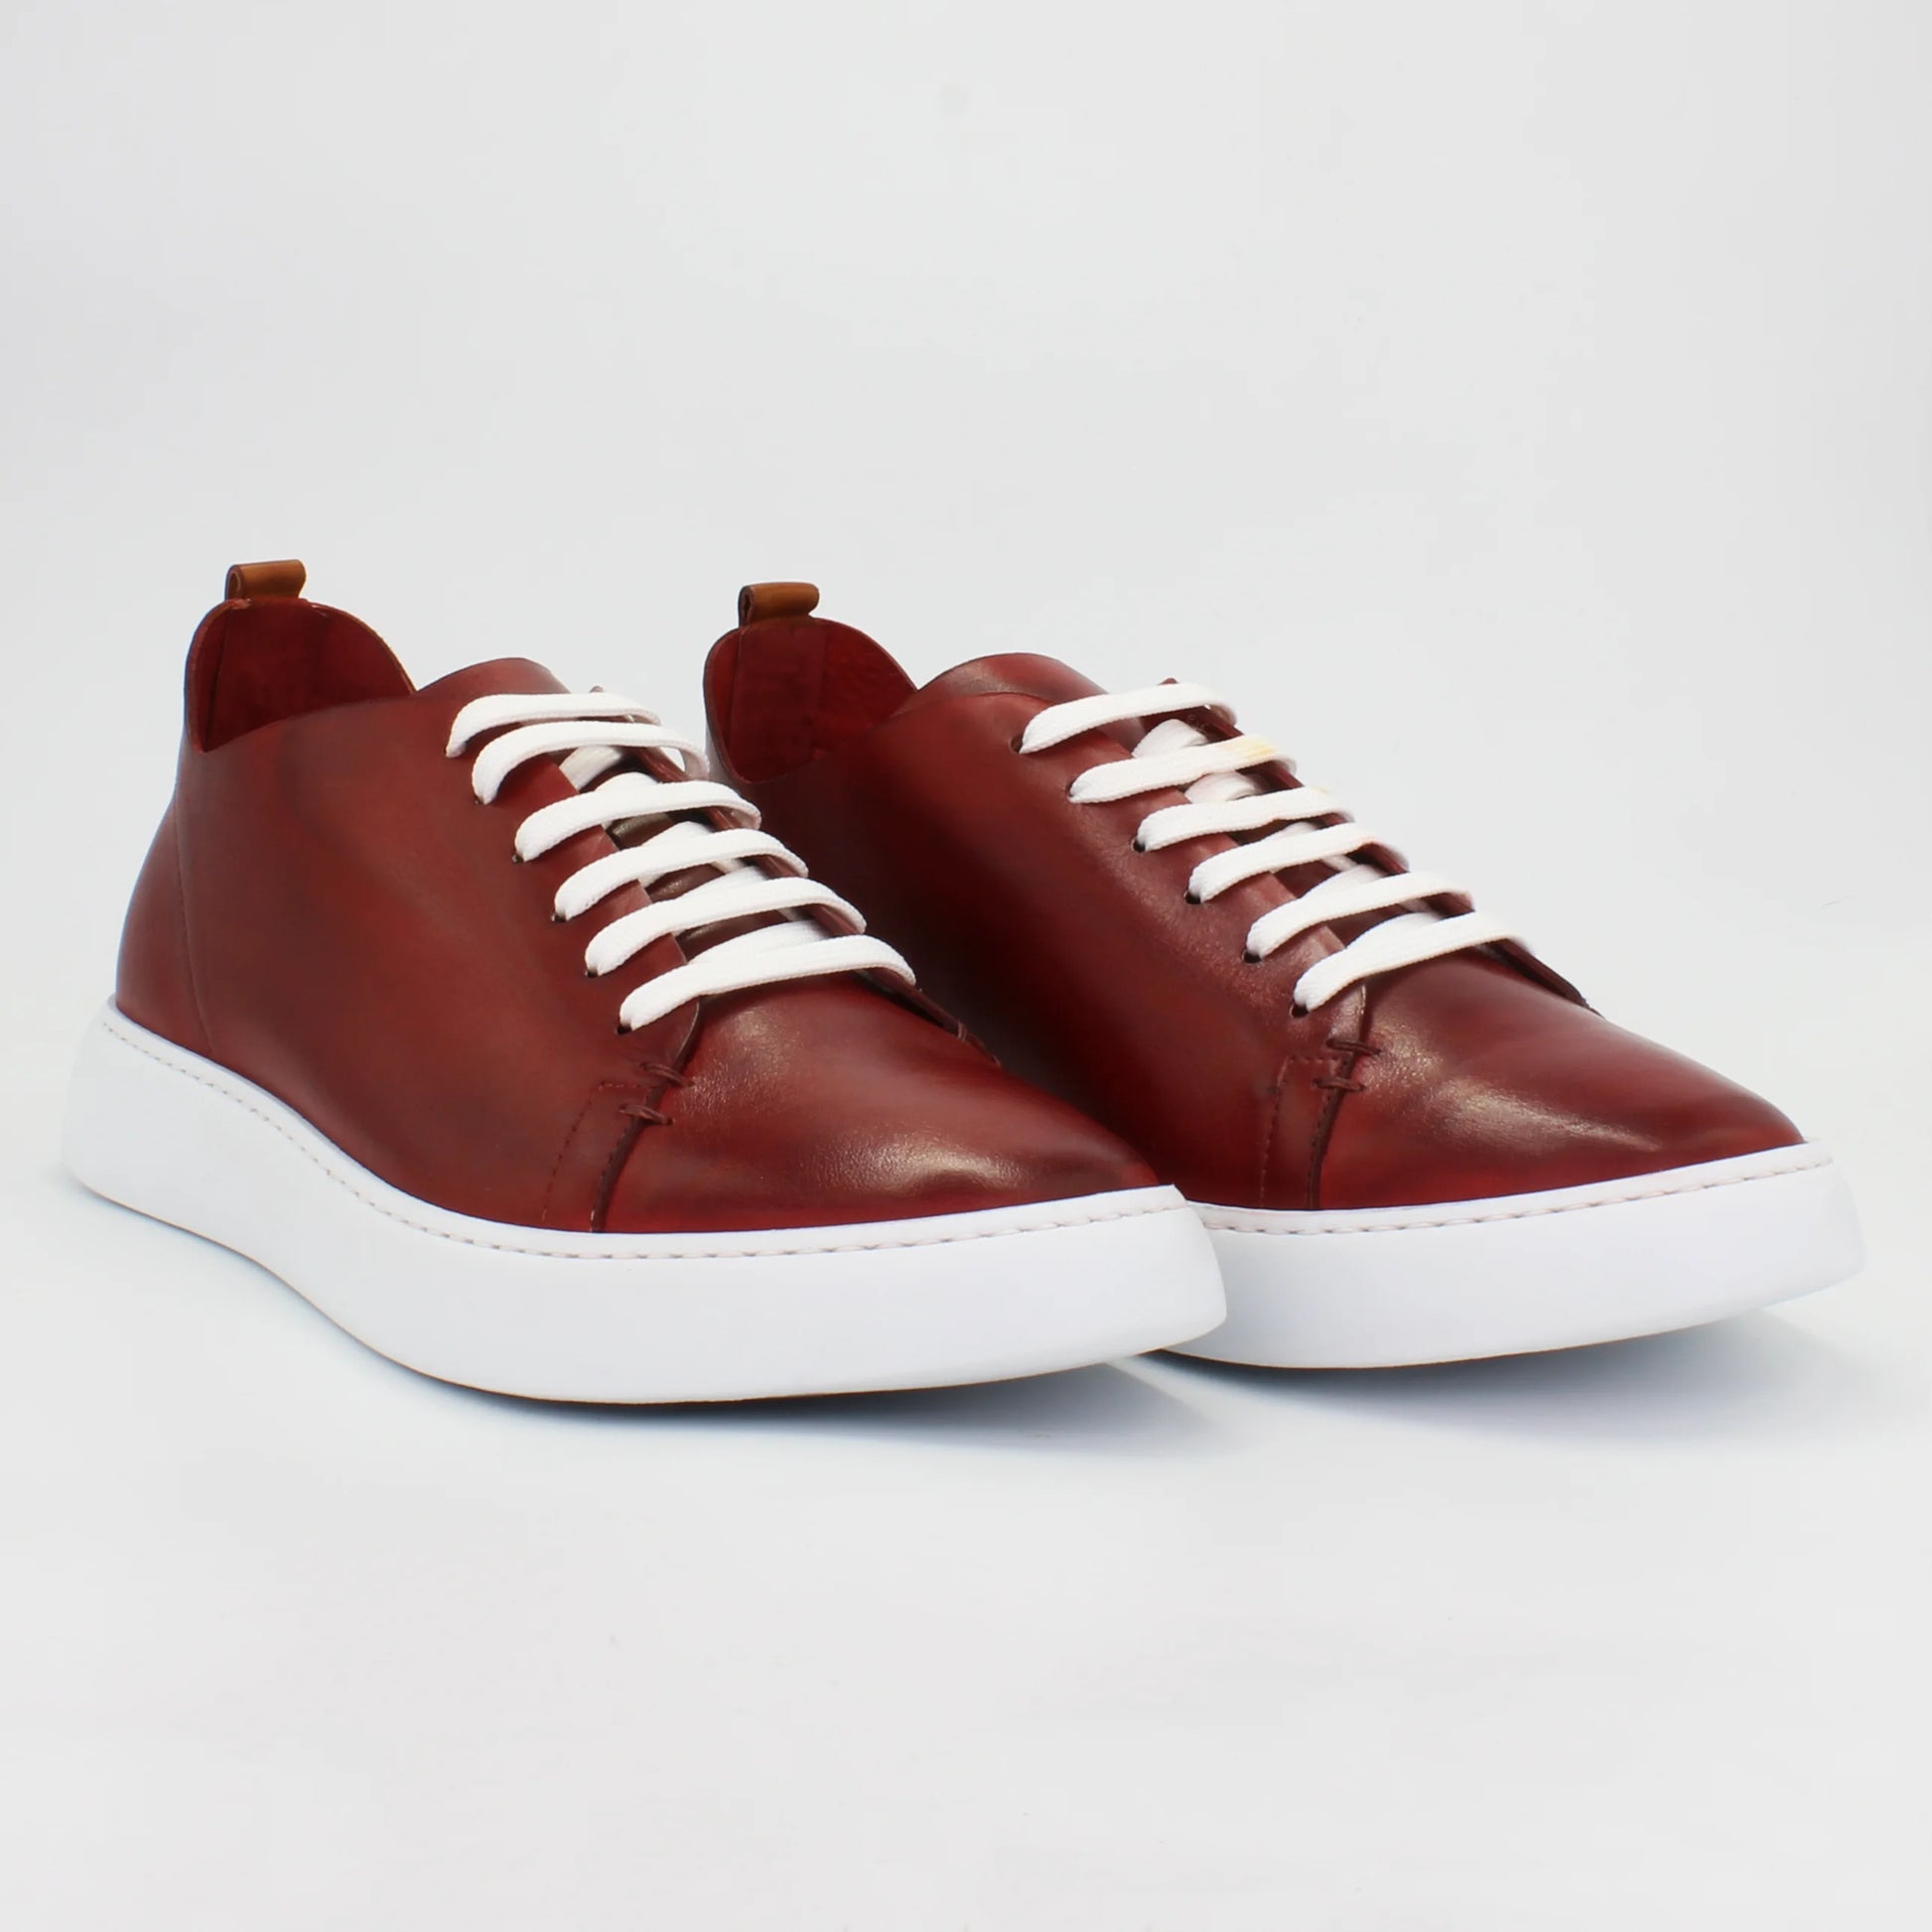 Shop Handmade Italian Leather Sneaker in red (BRU11354) or browse our range of hand-made Italian shoes for men in leather or suede in-store at Aliverti Cape Town, or shop online. We deliver in South Africa & offer multiple payment plans as well as accept multiple safe & secure payment methods.